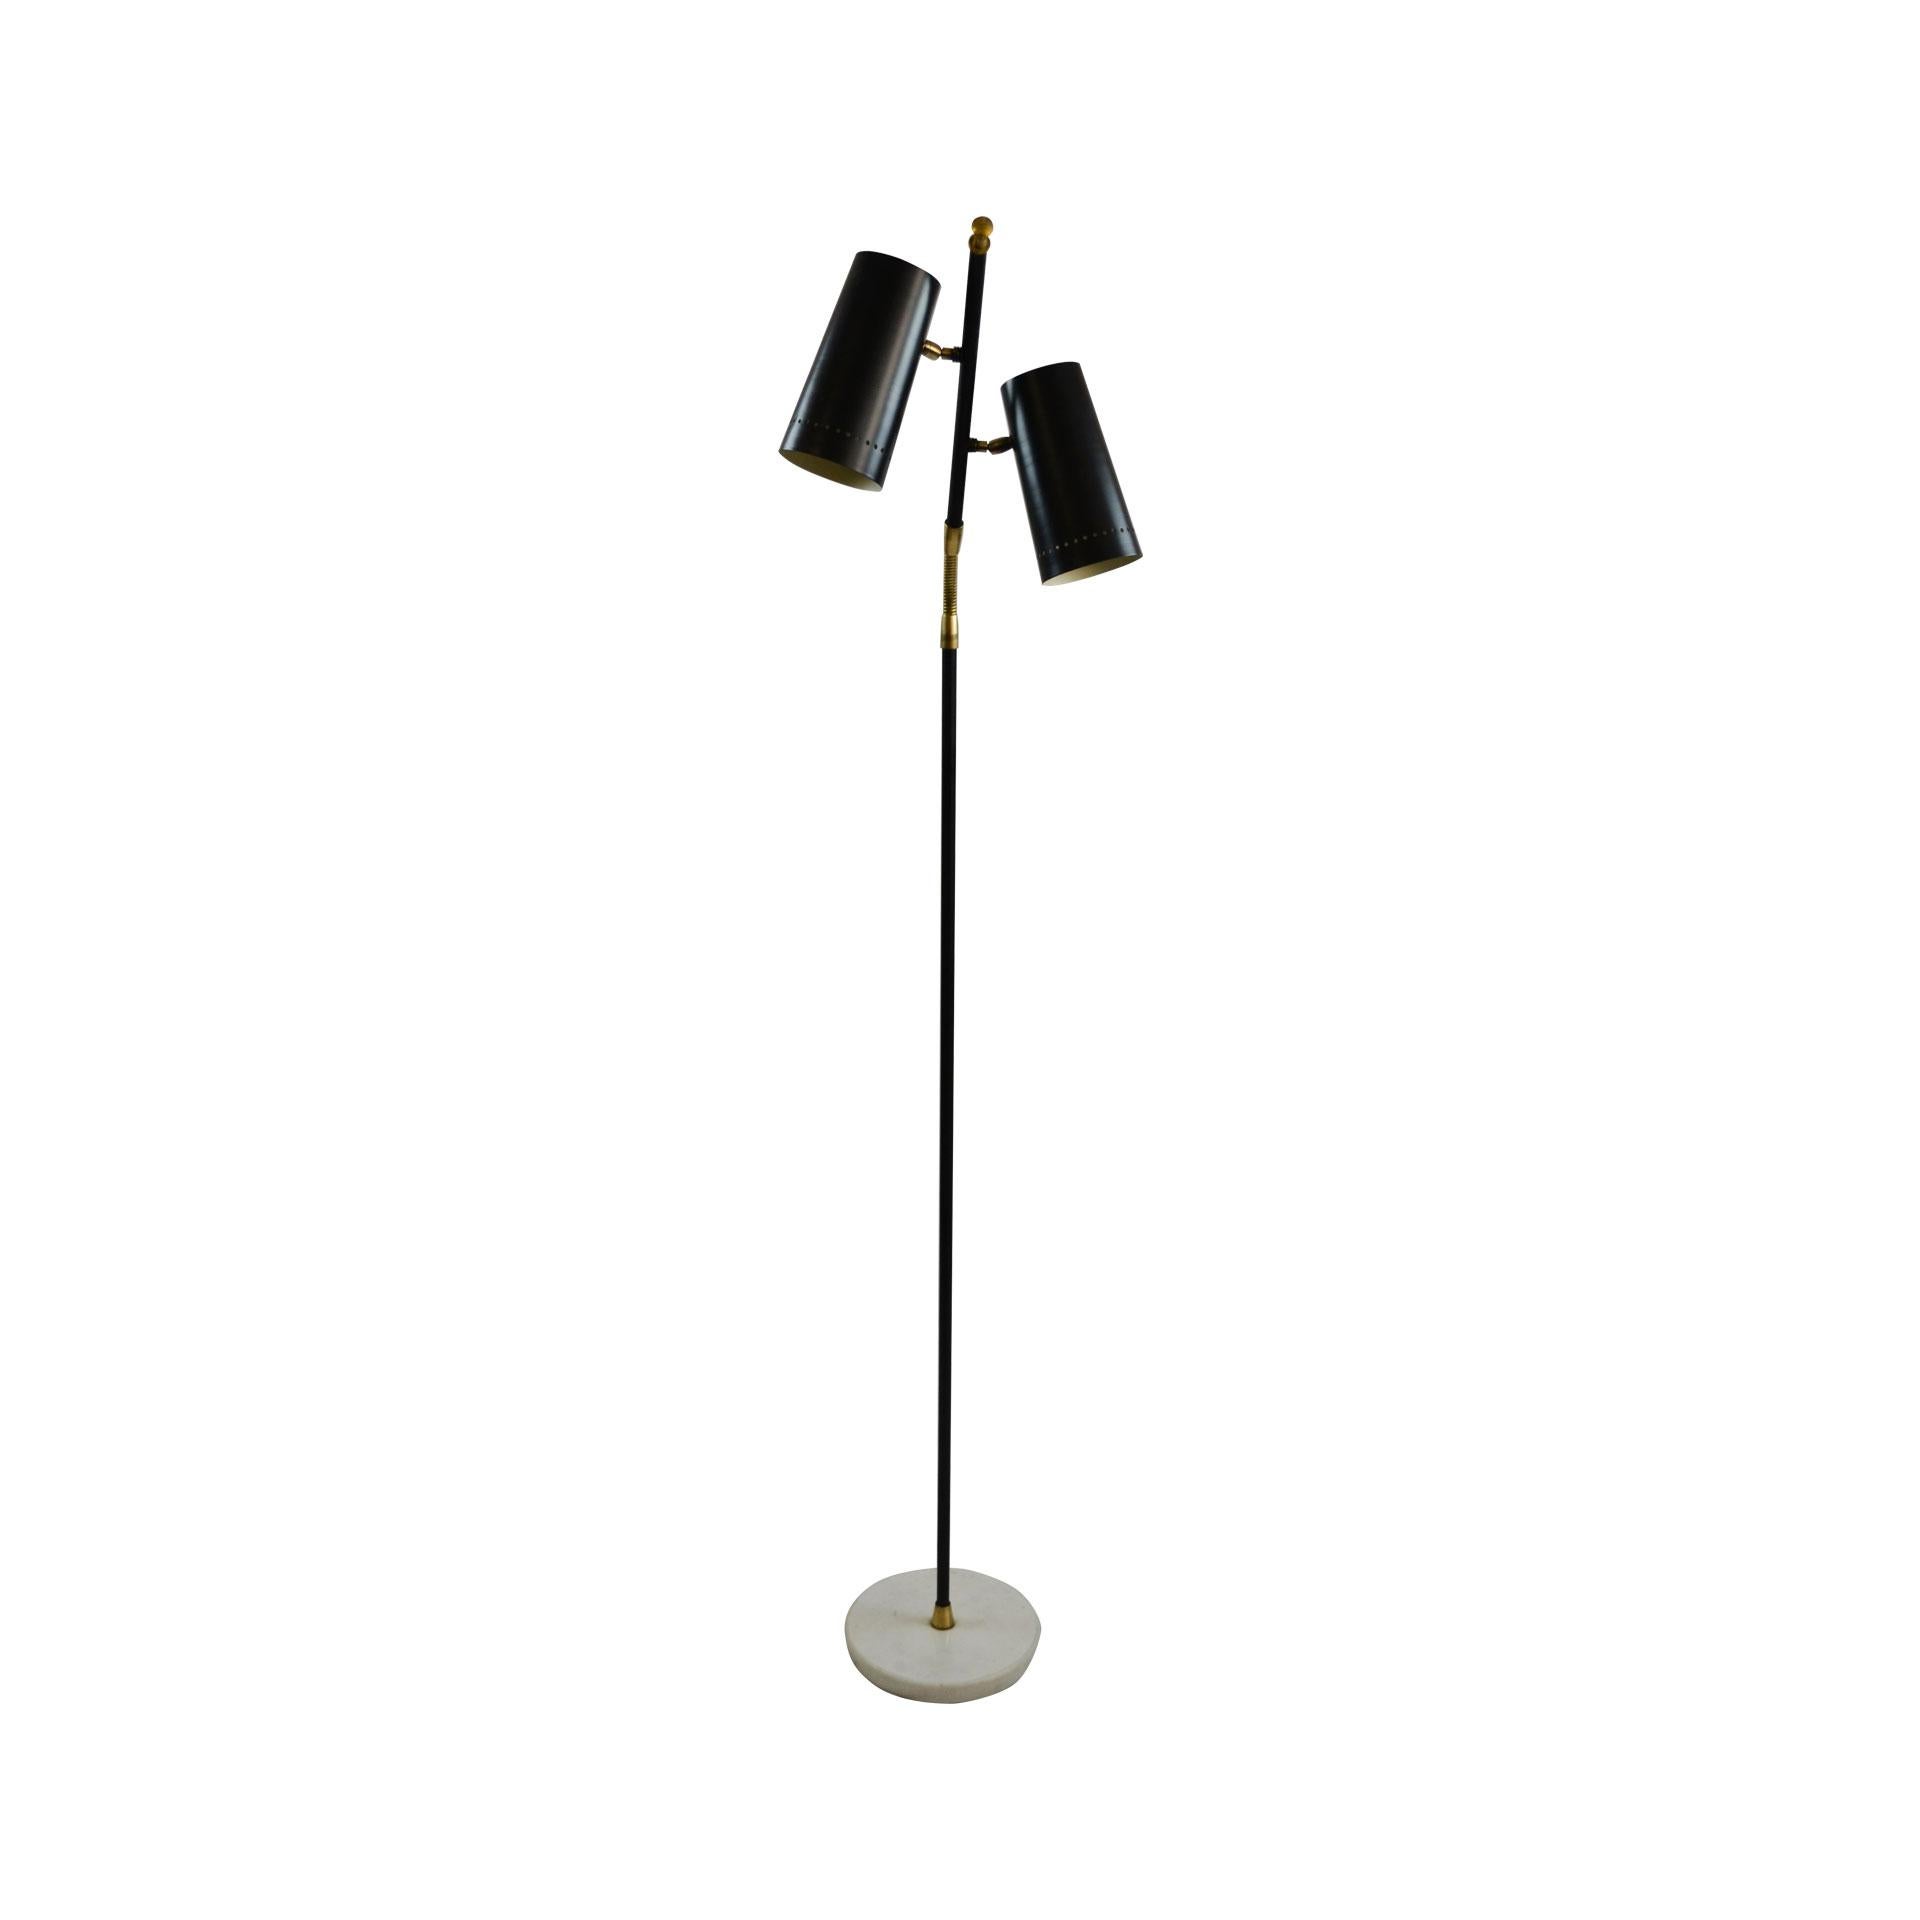 Floor lamp with two orientable diffusers designed in 1950s for Stilux. The floor lamp has a white marble base, structure in lacquered metal and orientable diffusers in black lacquered metal, details in brass. Measures: Maximum height 173 cm. Very